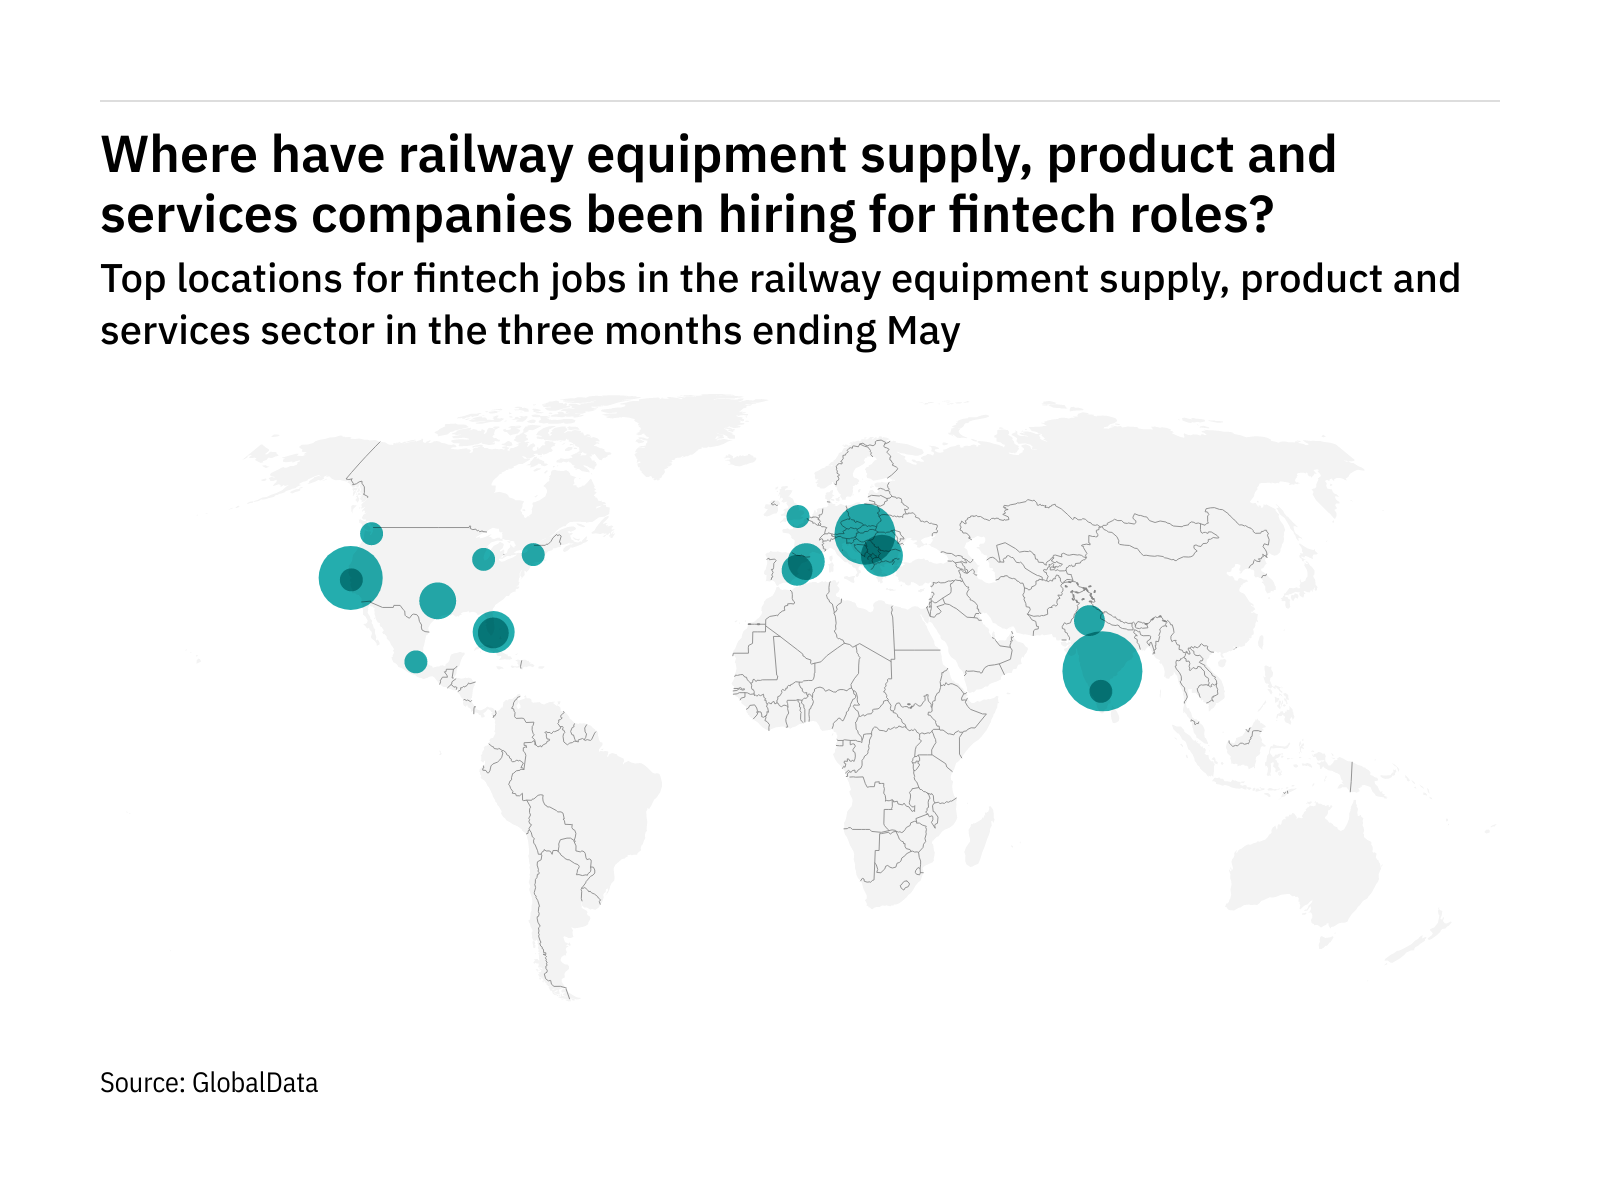 Europe is seeing a hiring boom in railway industry fintech roles